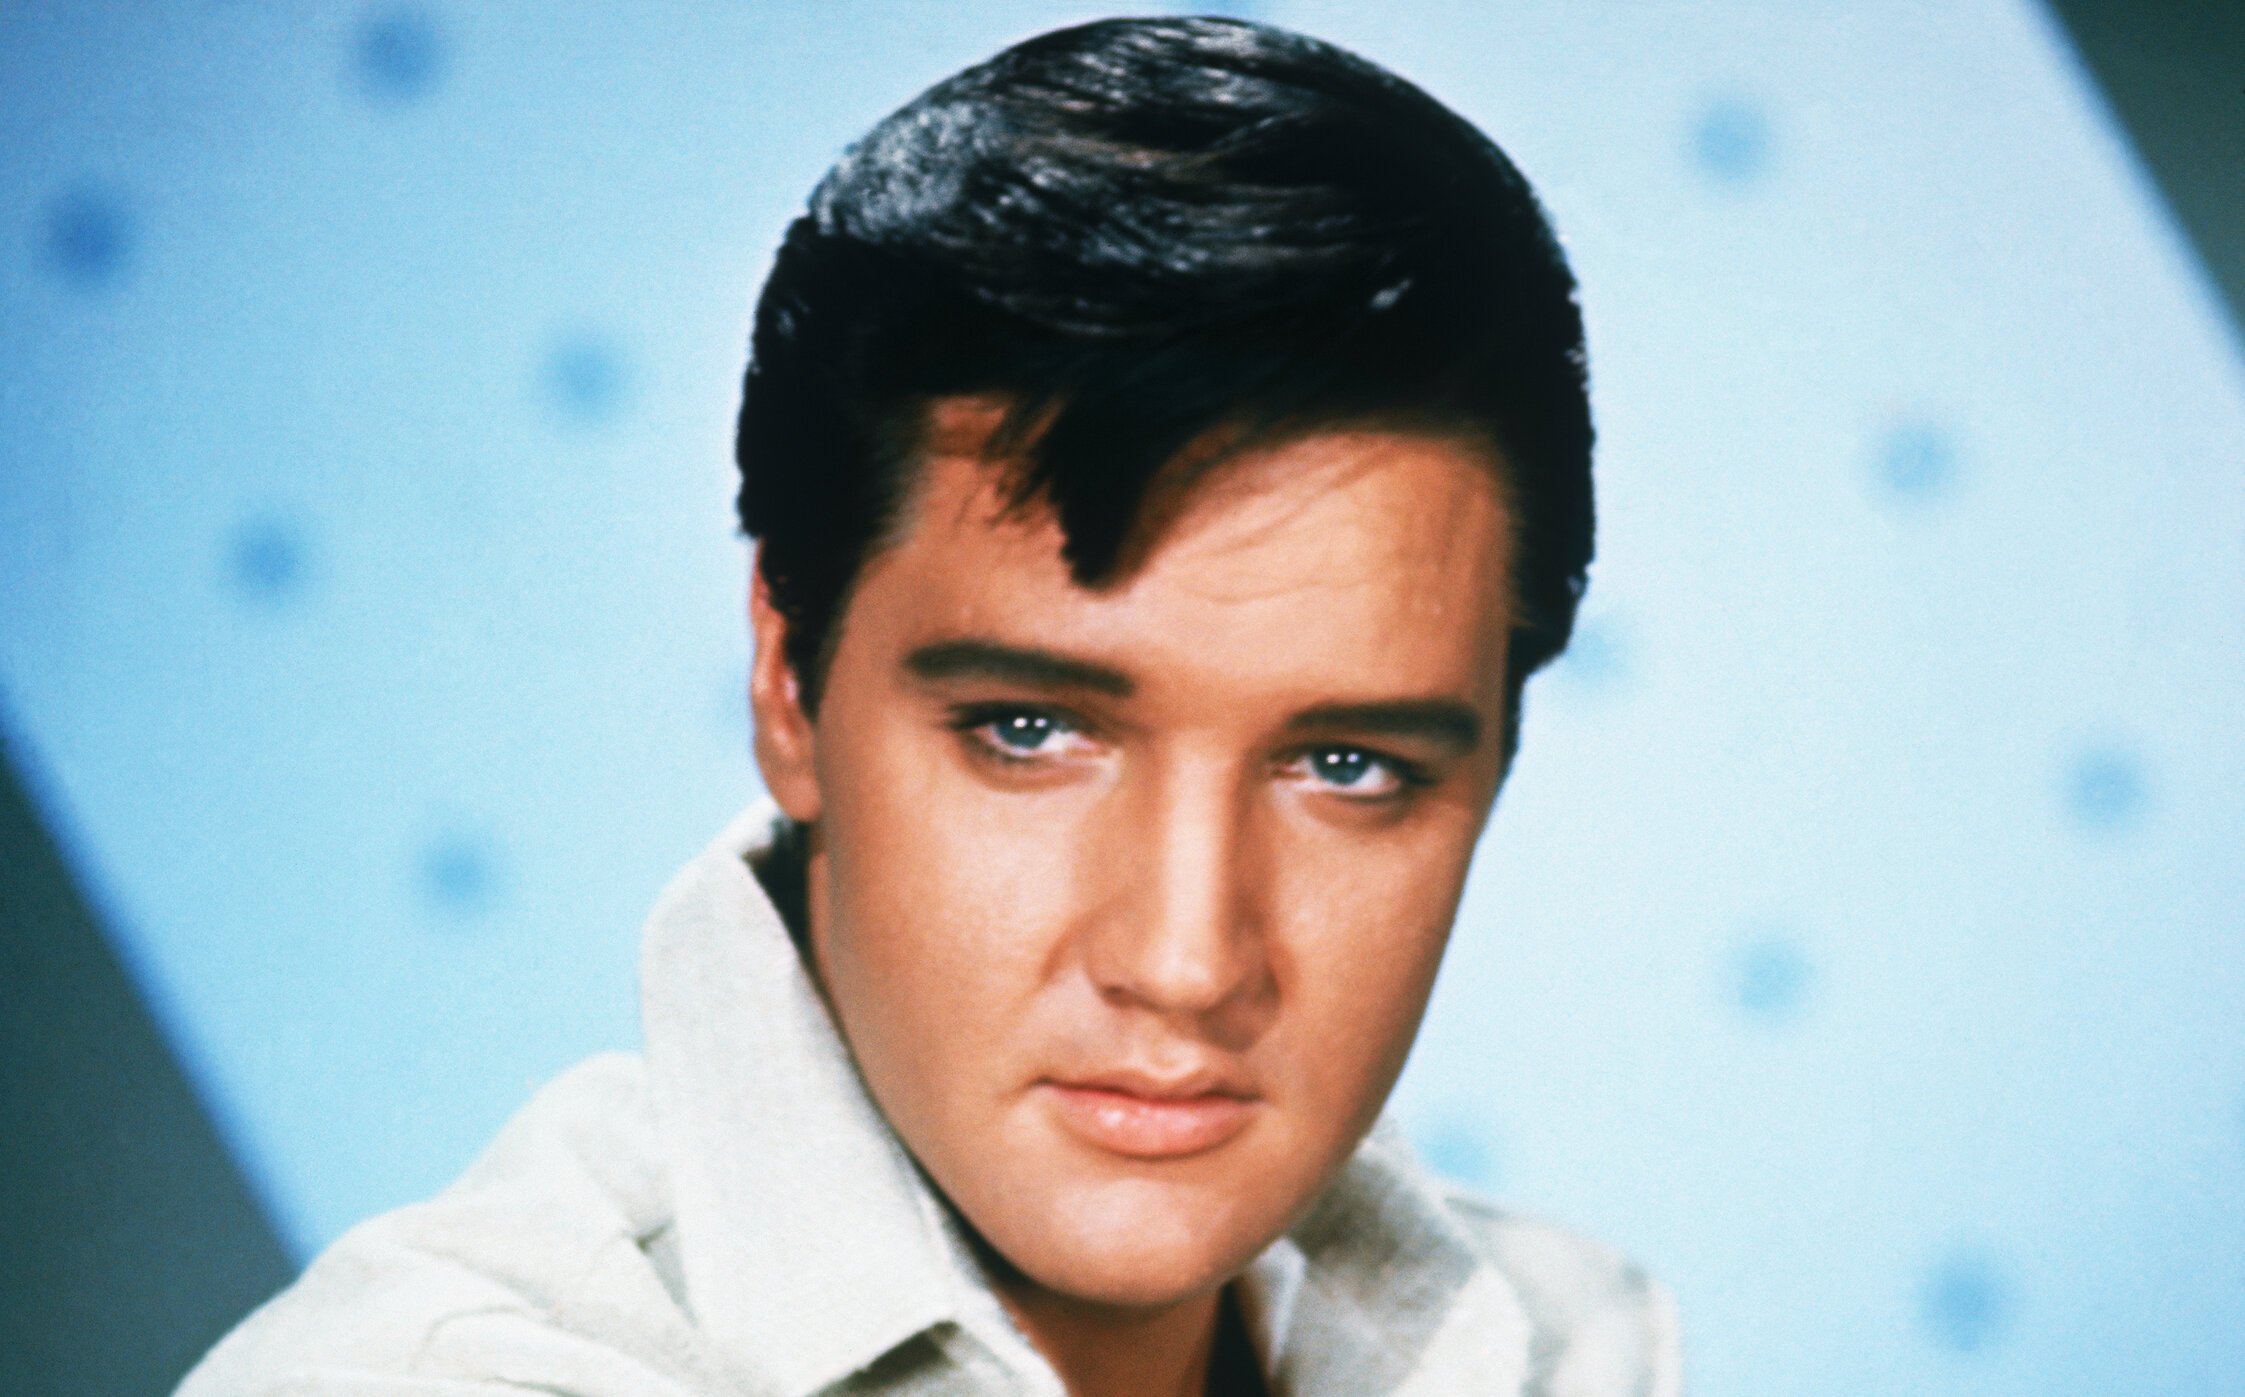 A close-up of Elvis Presley. He's in a white shirt in front of a light blue background.